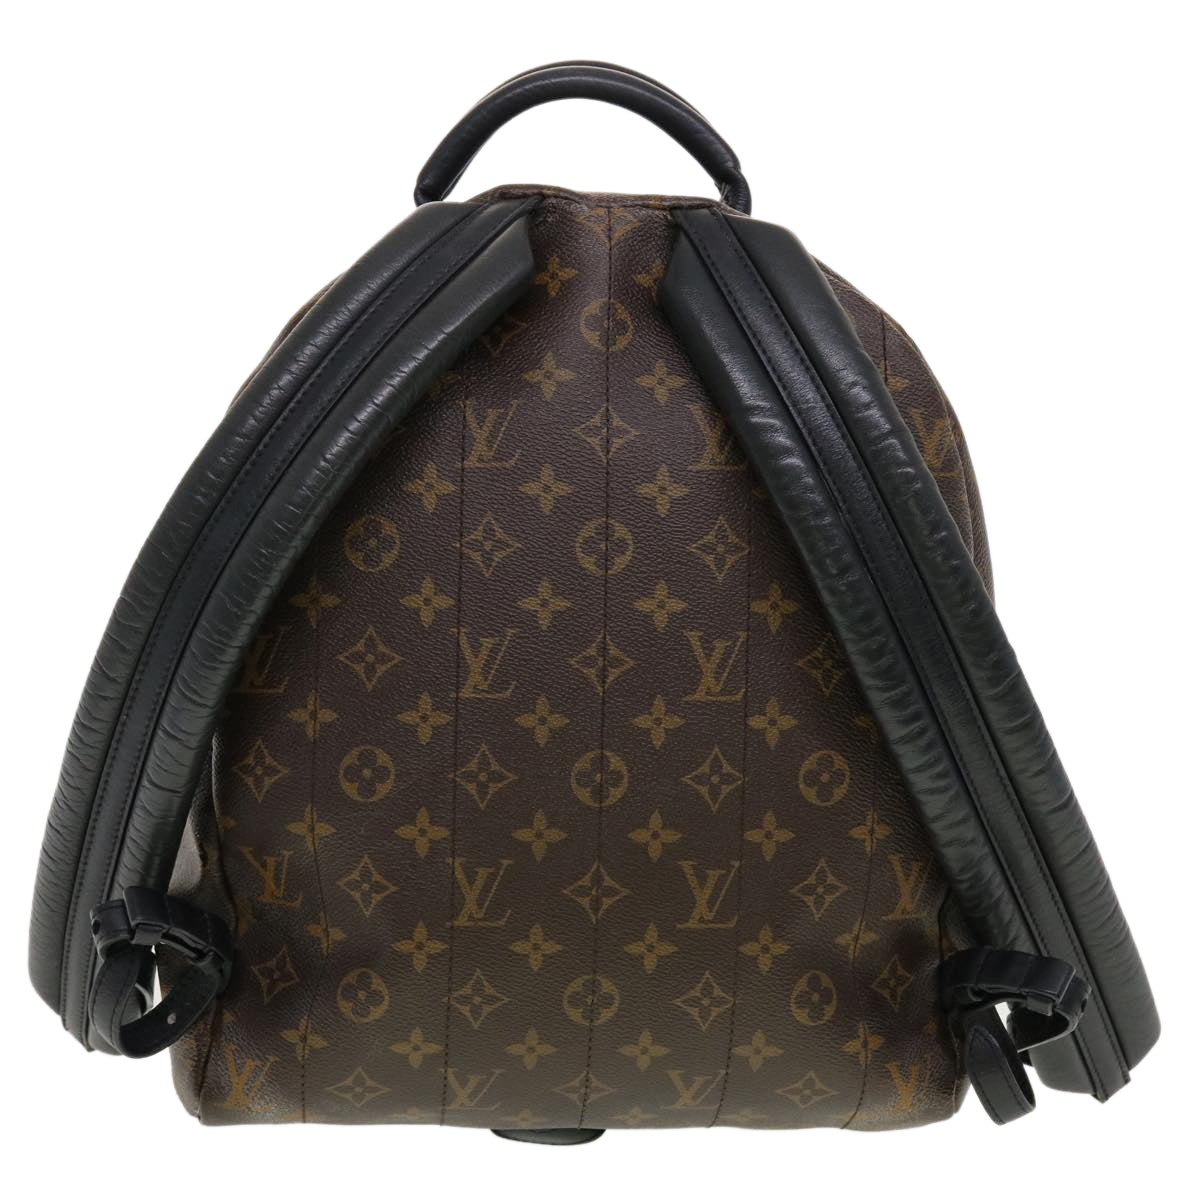 LOUIS VUITTON Monogram Palm Springs MM Backpack M44874 LV Auth bs5175 - 0